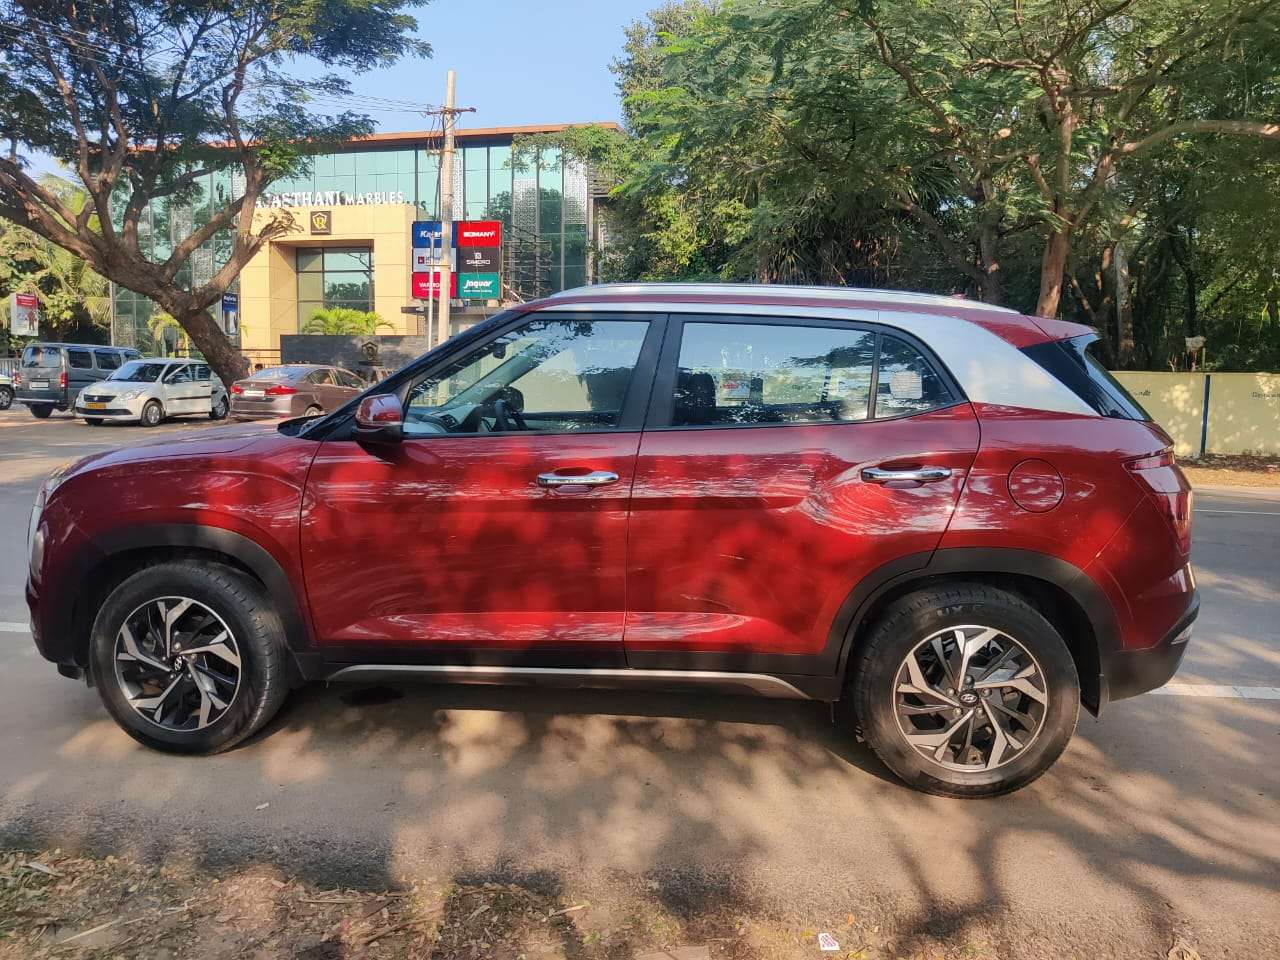 2734-for-sale-Hyundai-Creta-Diesel-First-Owner-2021-PY-registered-rs-1550000